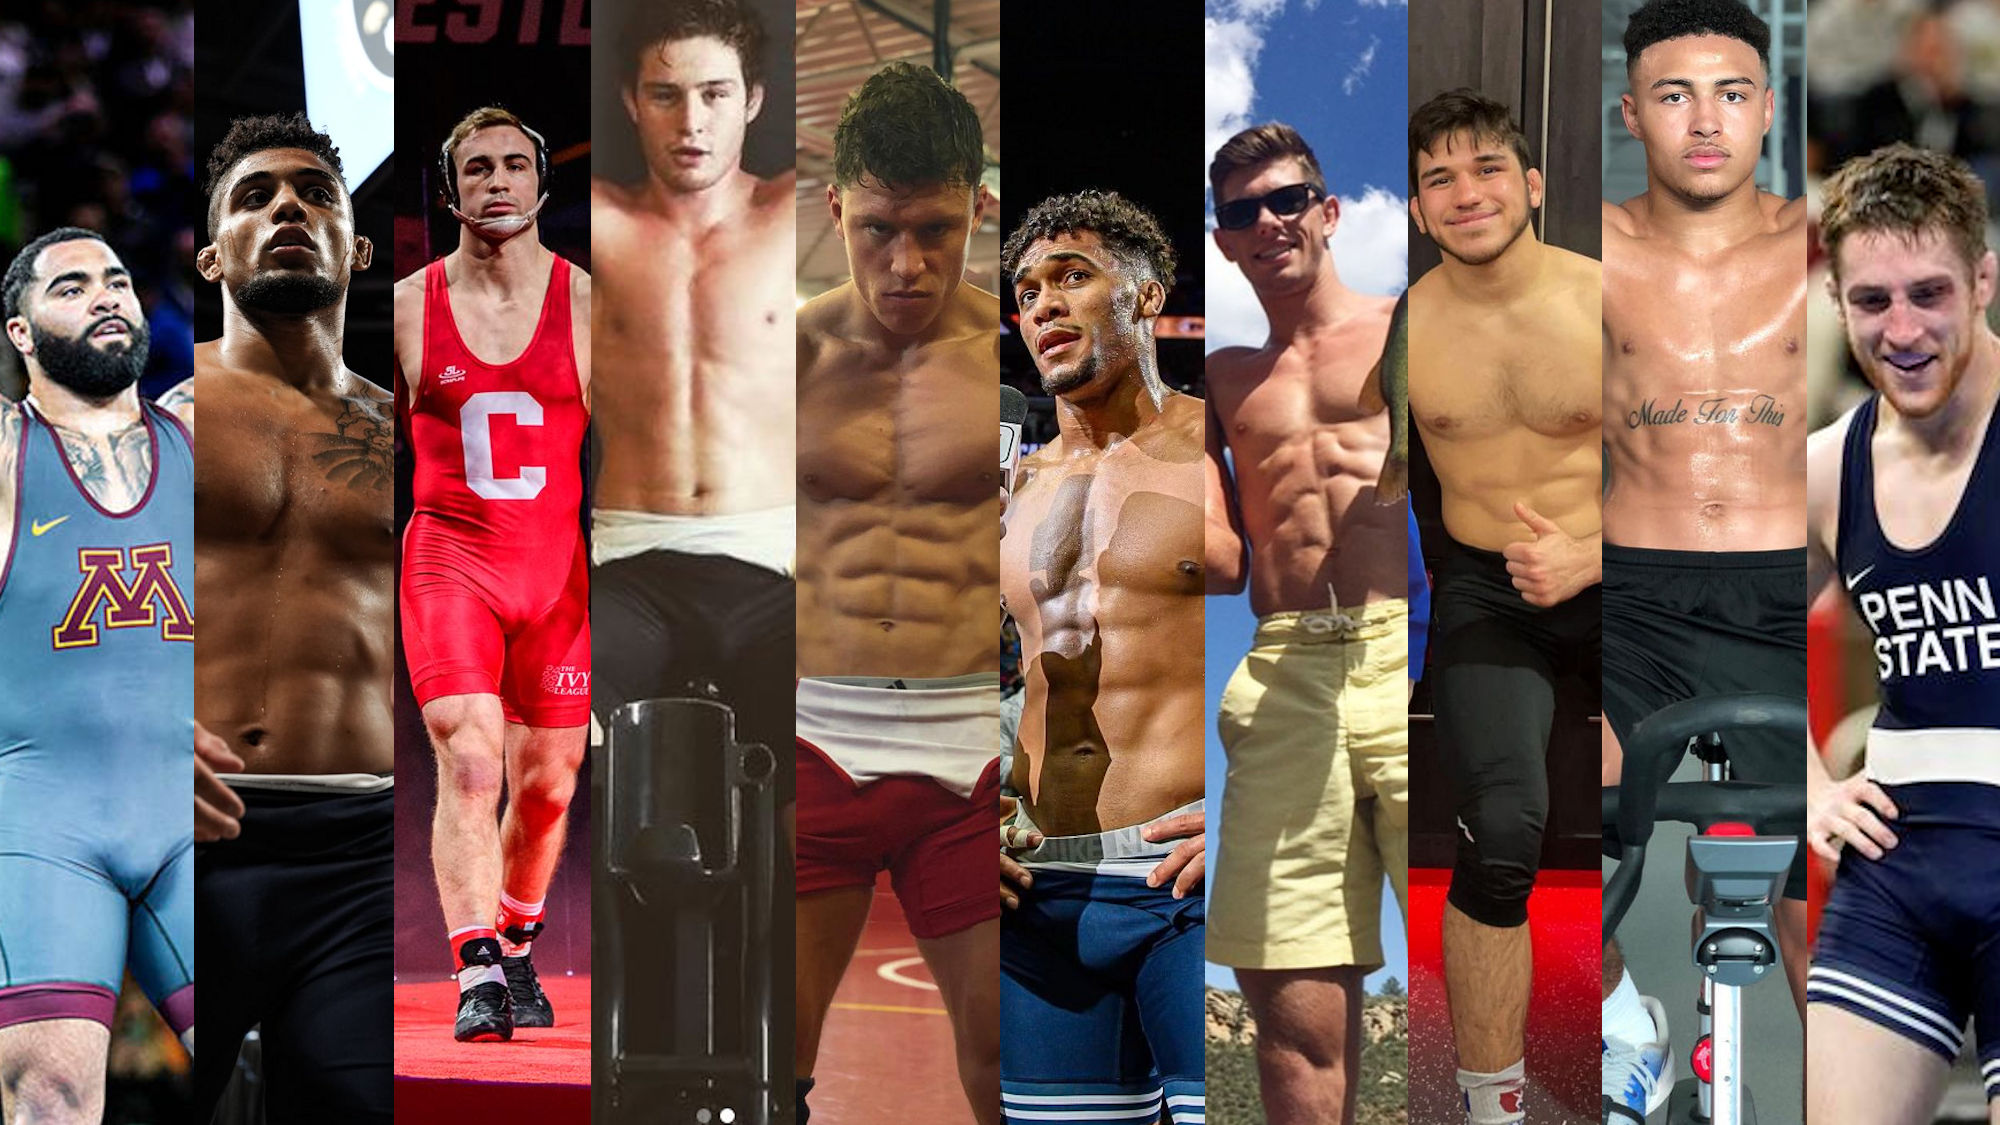 School Wrestling Porn - Bulges, Biceps & Butts: Who's The Hottest 2022 College Wrestling Champion?  - TheSword.com